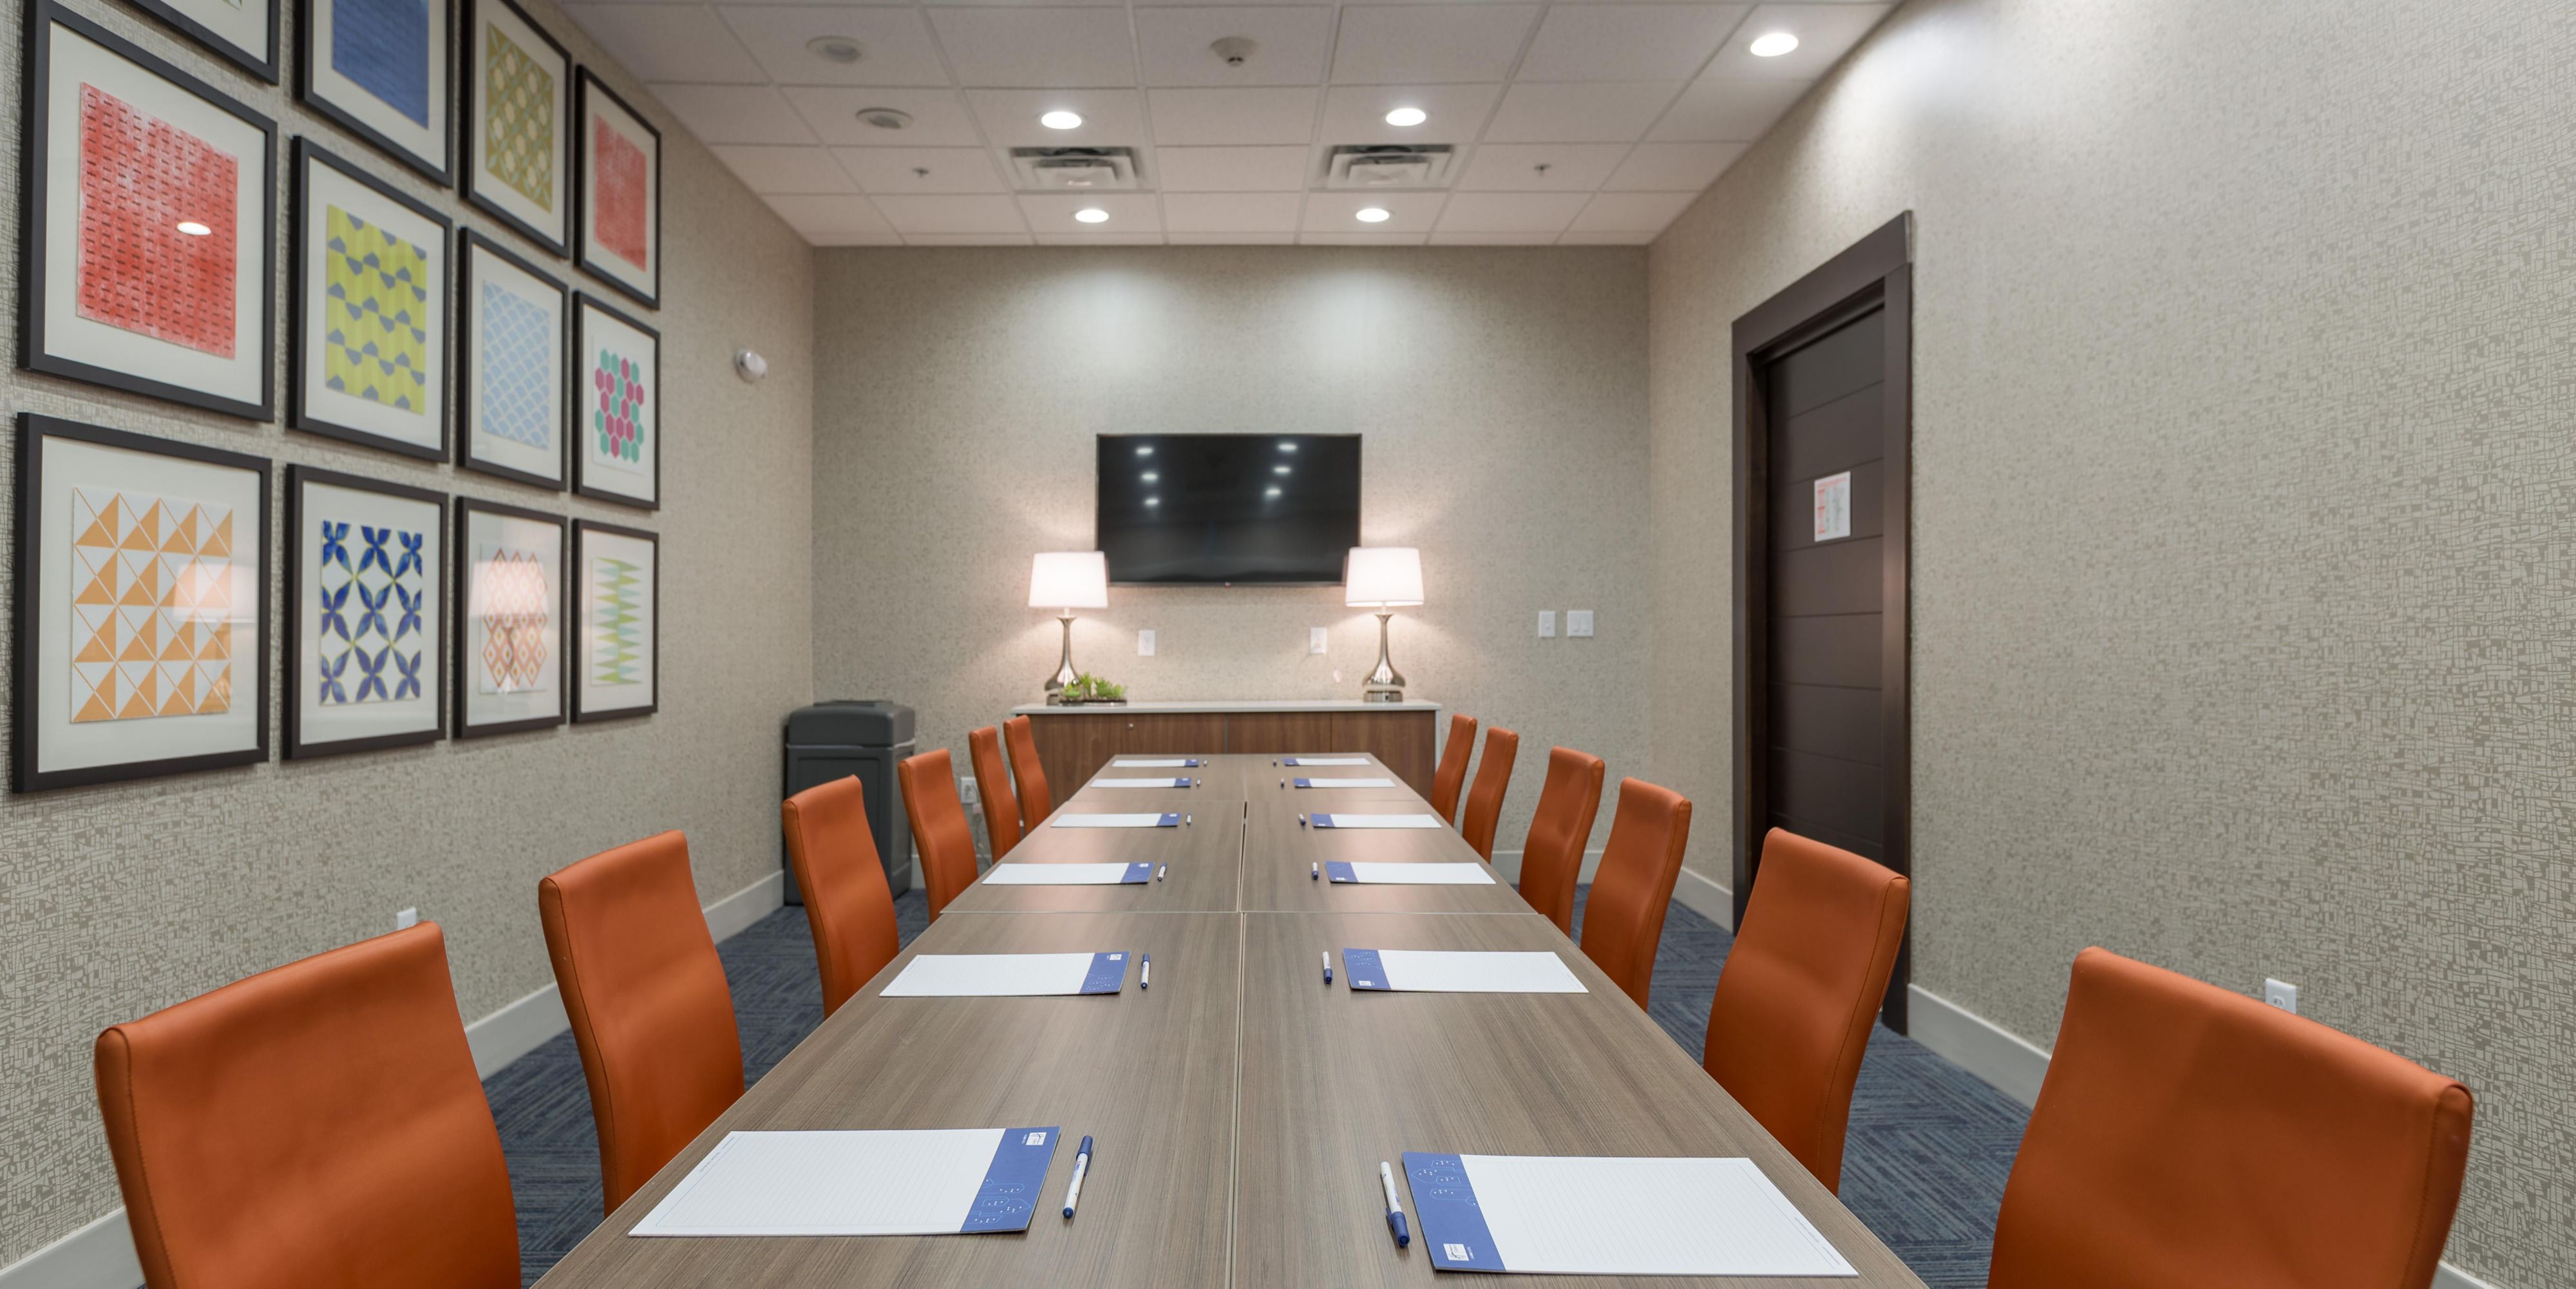 With 700 sq. ft. of flexible space including 1 meeting room and 1 board room, your next San Marcos event will be unforgettable. Guests will enjoy Holiday Inn Express' commitment to service and quality Our in-house meeting and events team ensure every detail is complete. Perfect for small team meetings or sports huddles.